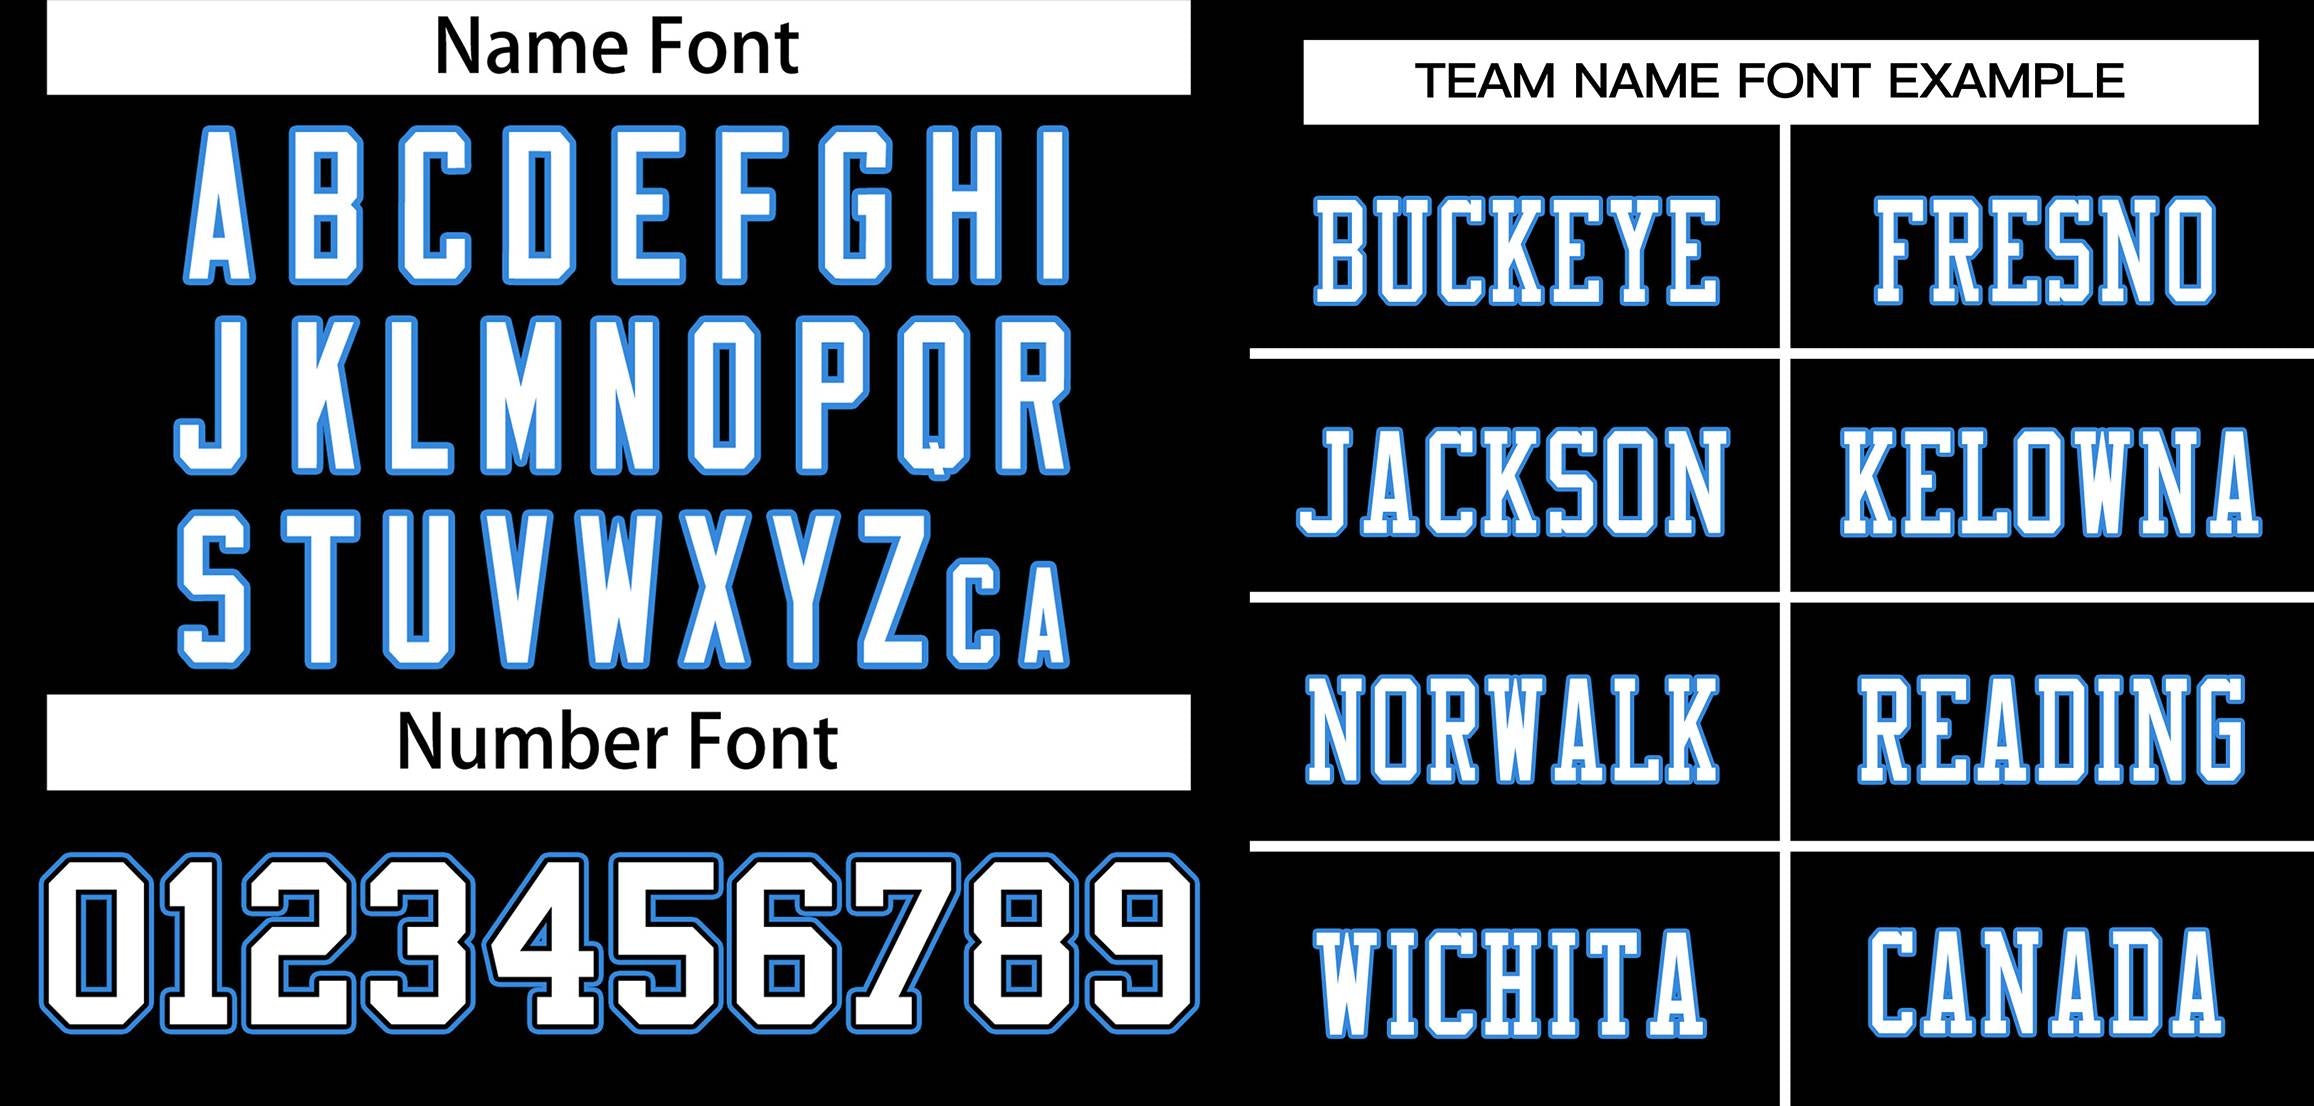 jersey t shirt football team name font style